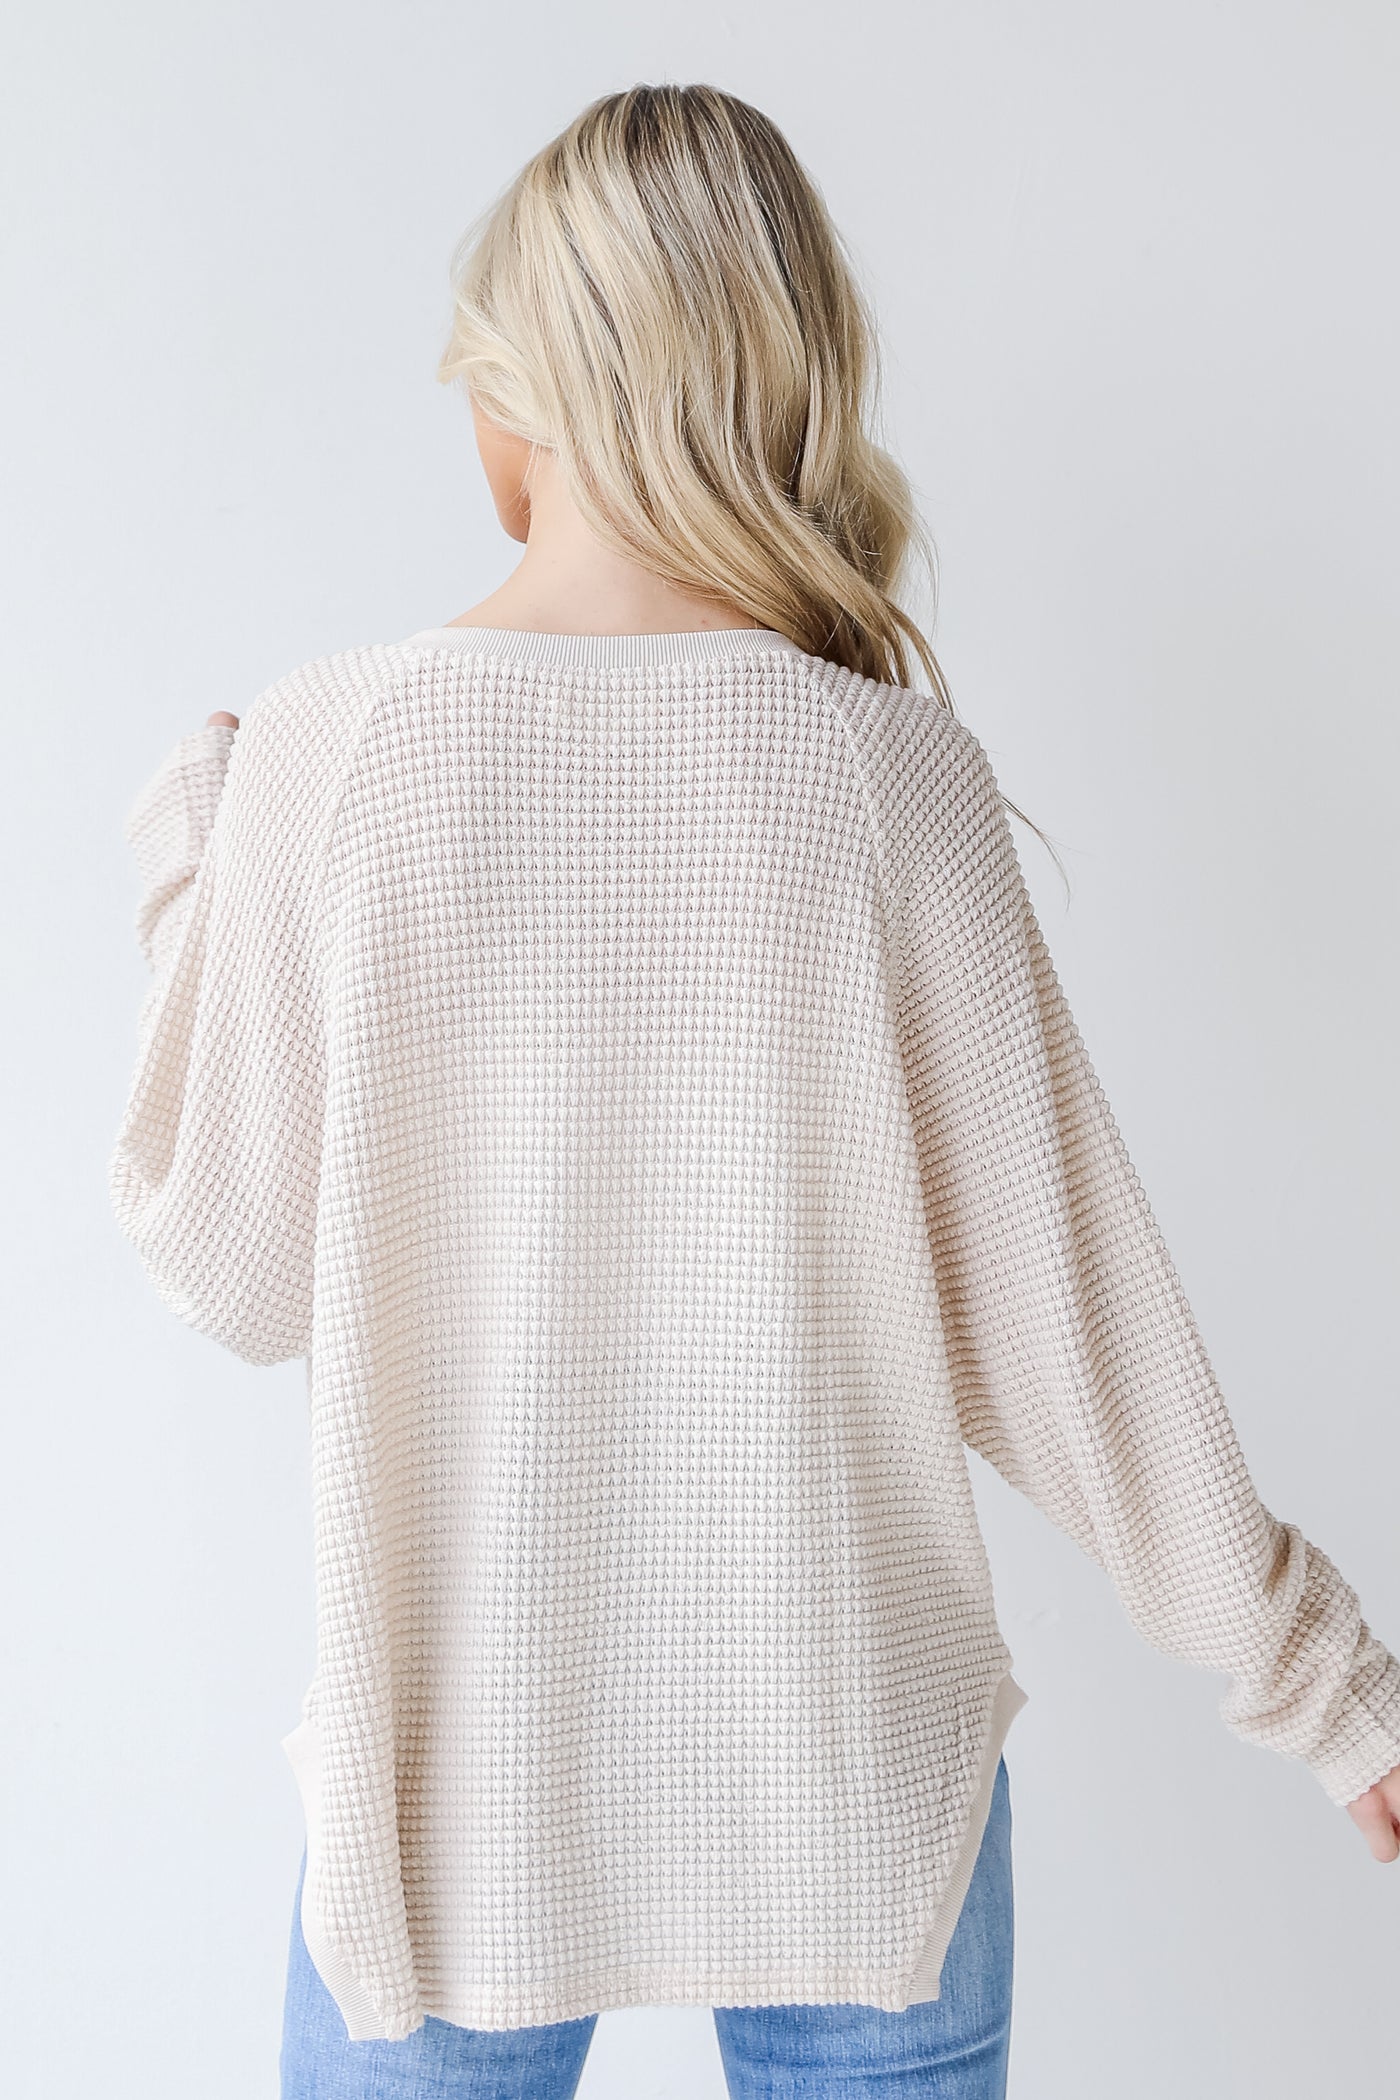 Waffle Knit Henley Top in ivory back view